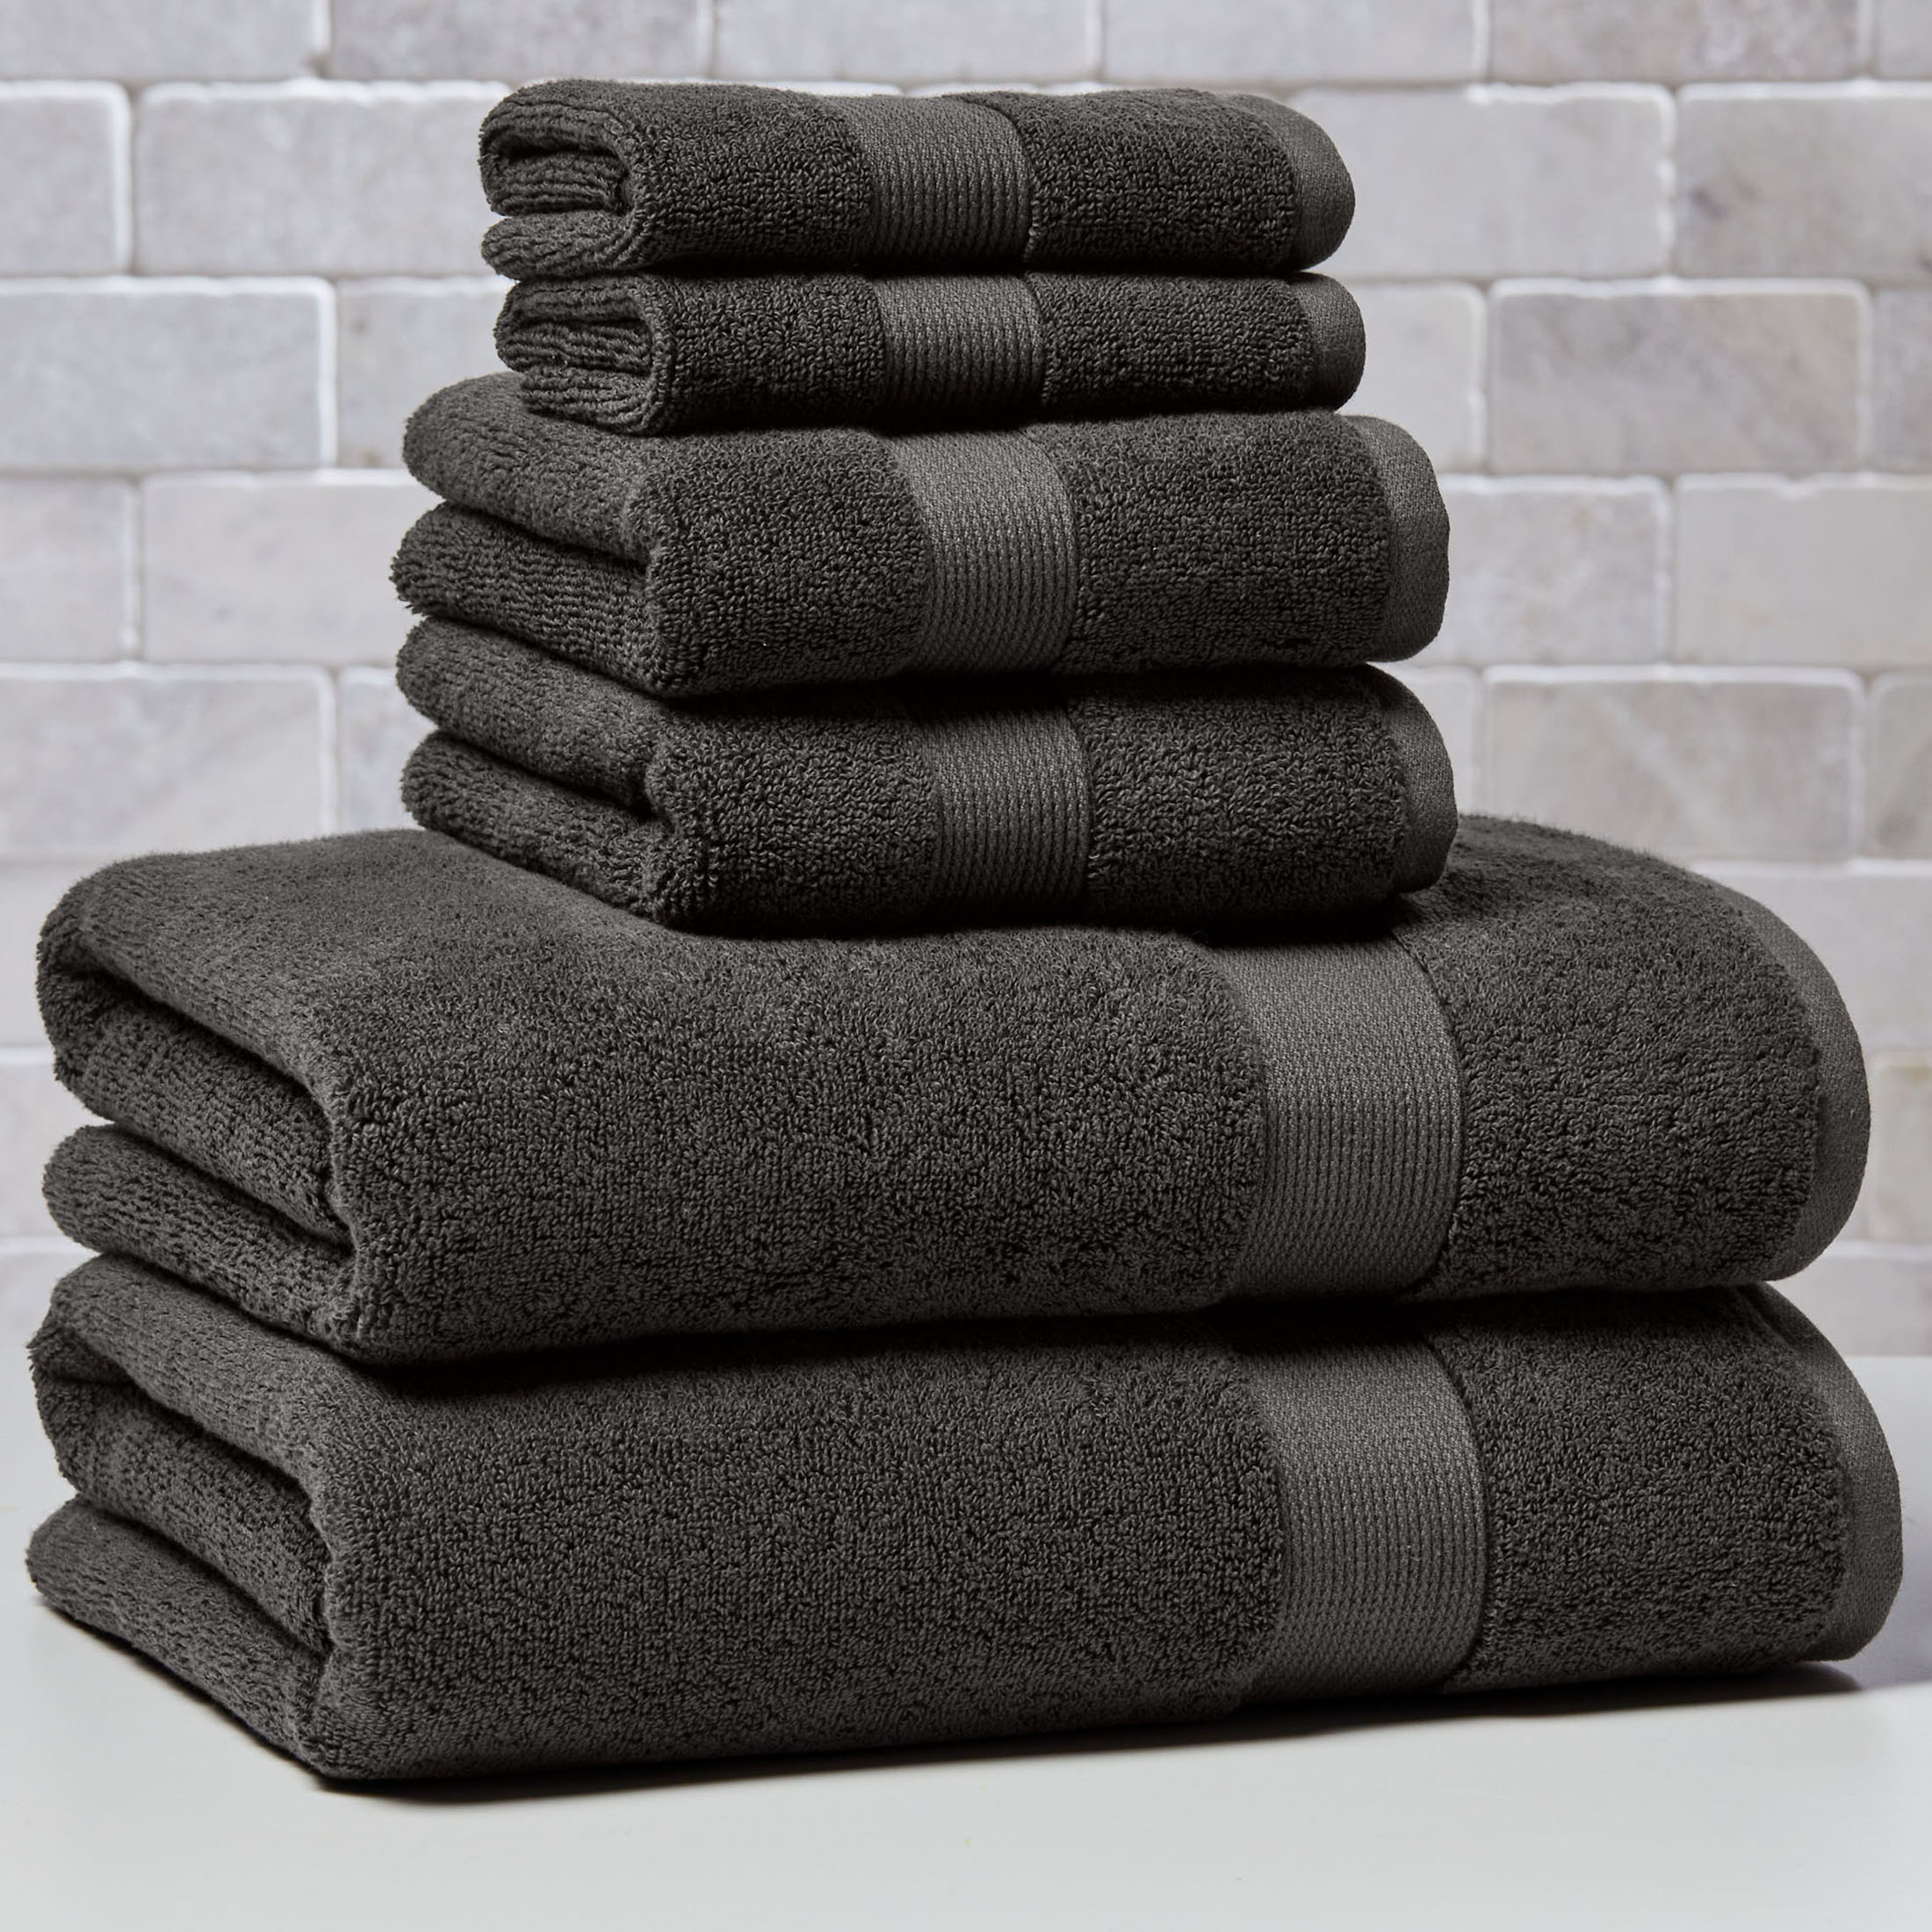 Better Homes & Gardens Signature Soft Hand Towel, Gray - image 5 of 6